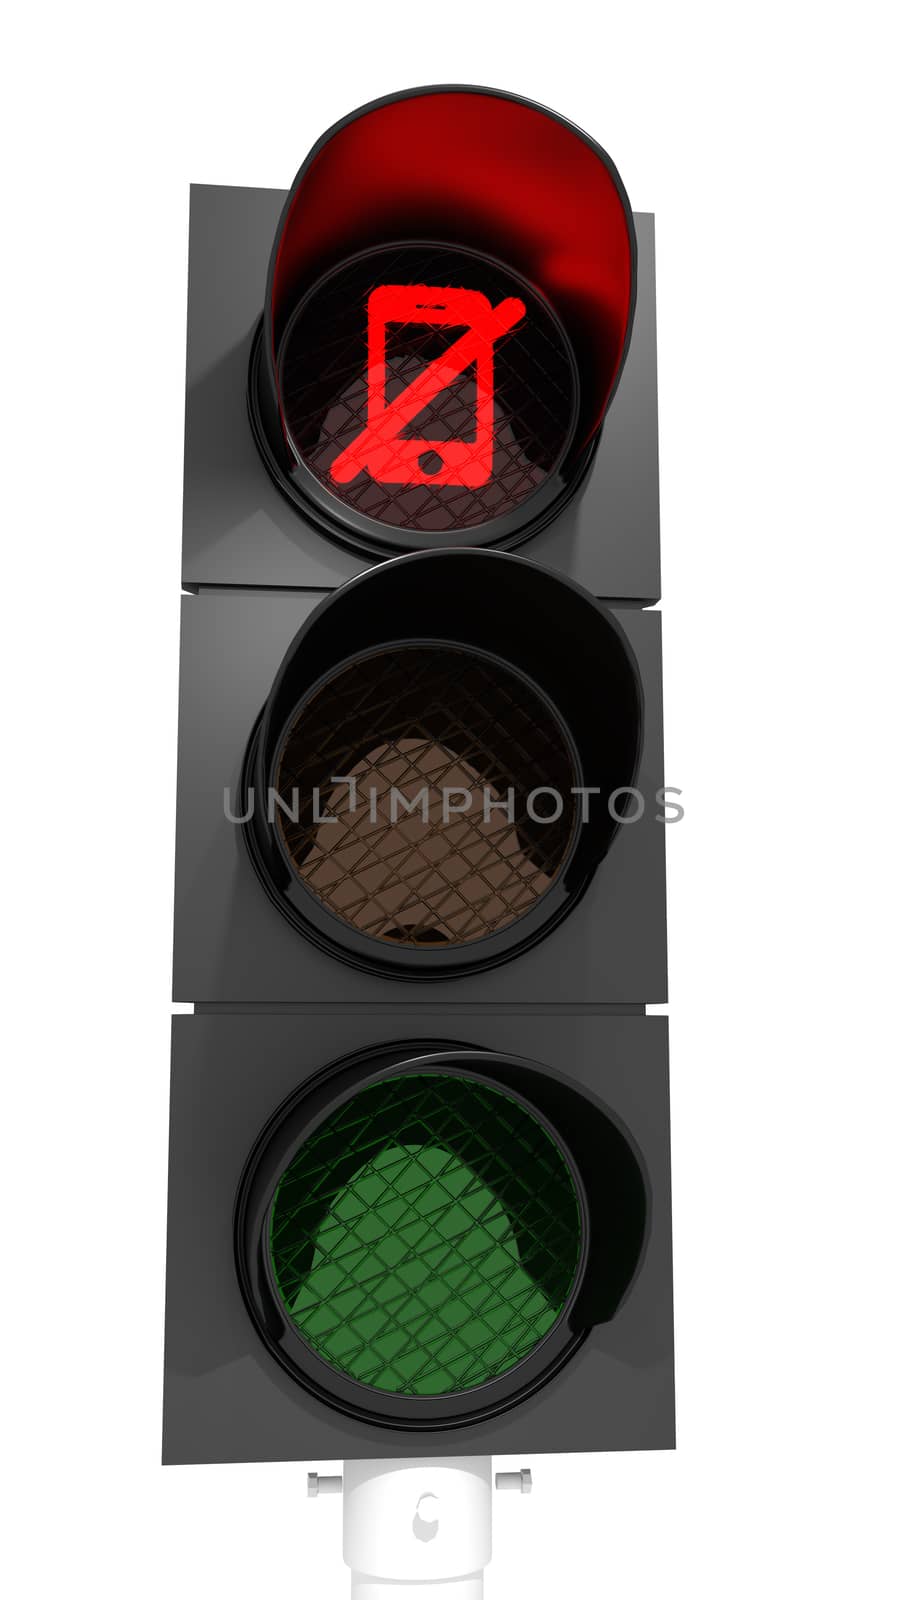 Traffic light with red-"No Mobile"-sign